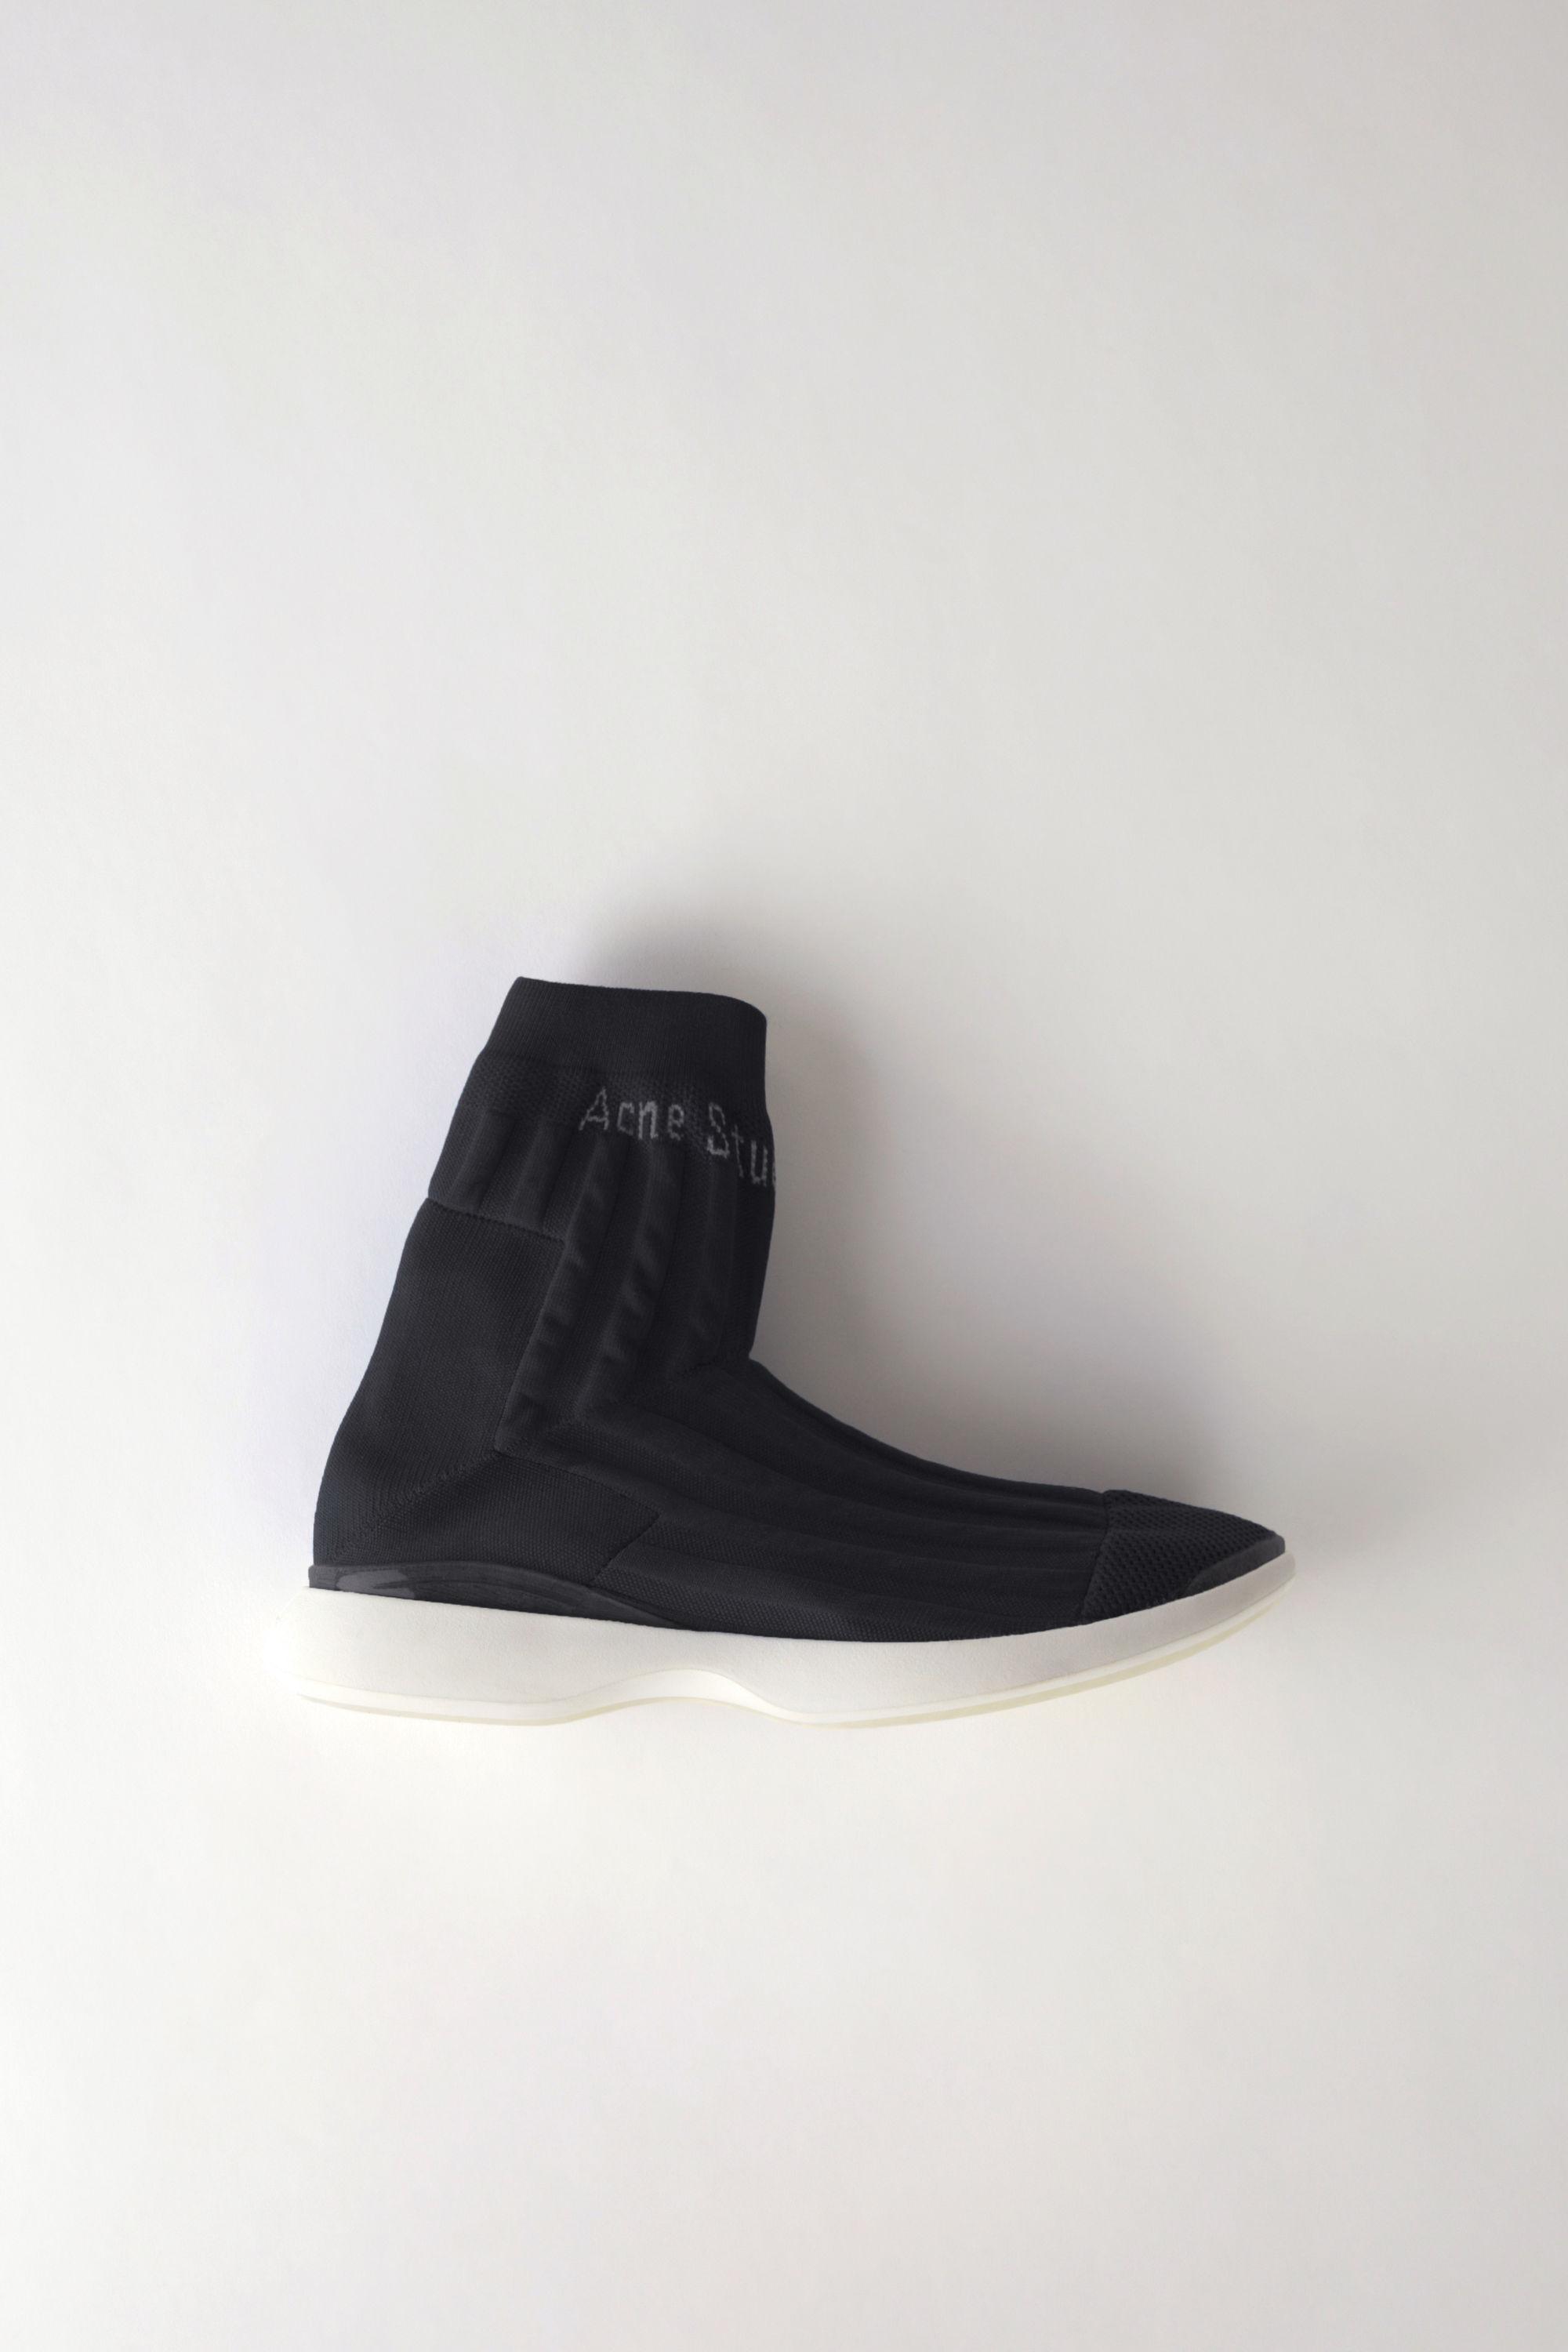 Acne Studios Synthetic Batilda As Black/white Knitted Sock Sneakers - Lyst